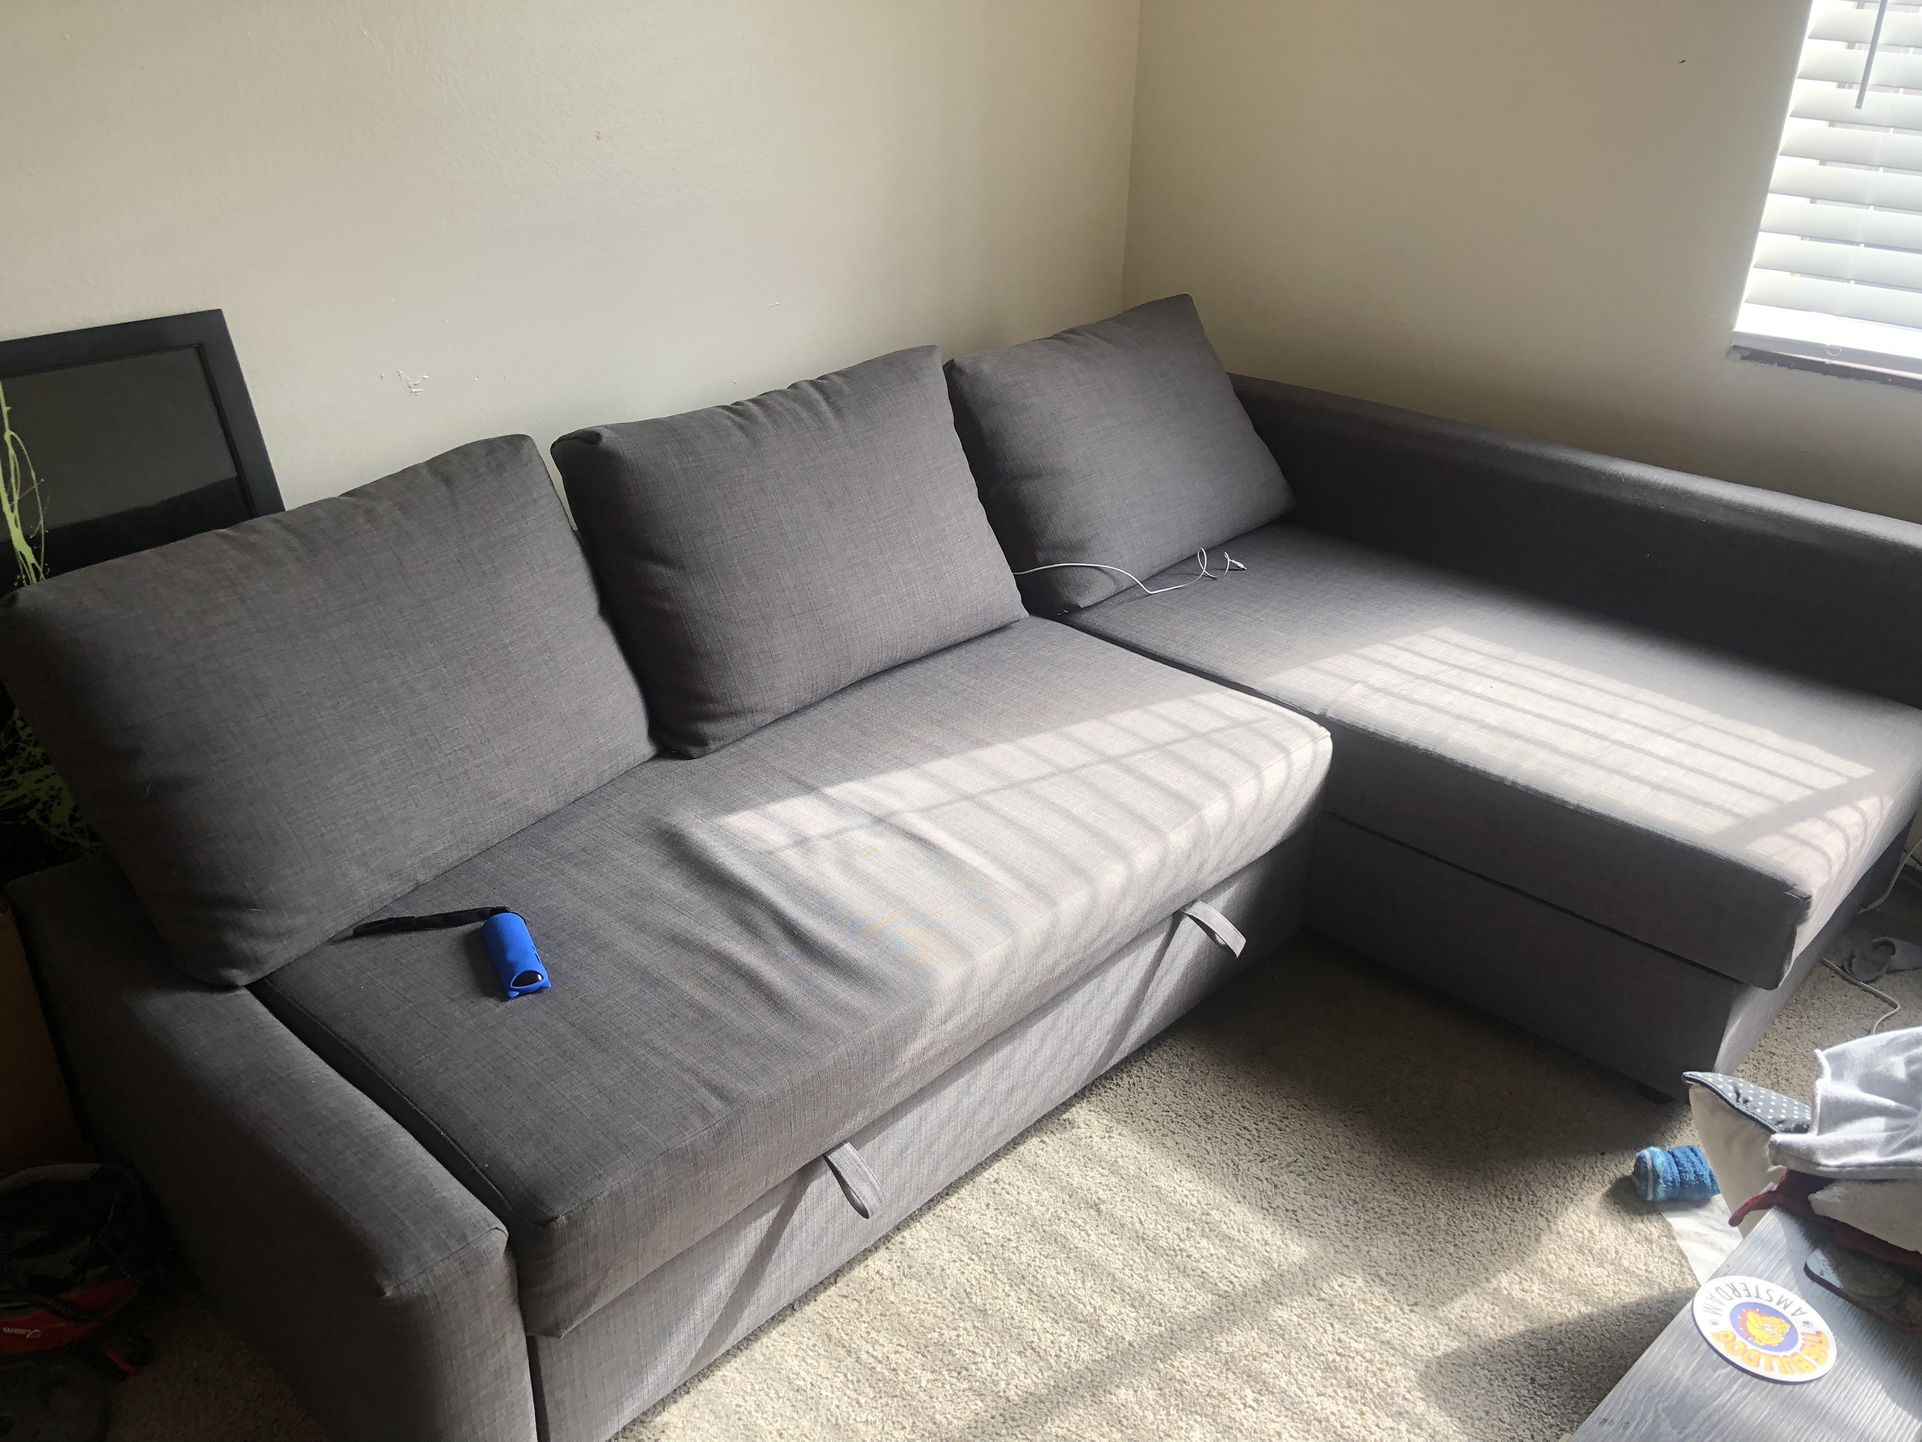 L Shaped Couch - Has Extra Storage And Can Turn Into A Sofa Bed. No Major Defects 